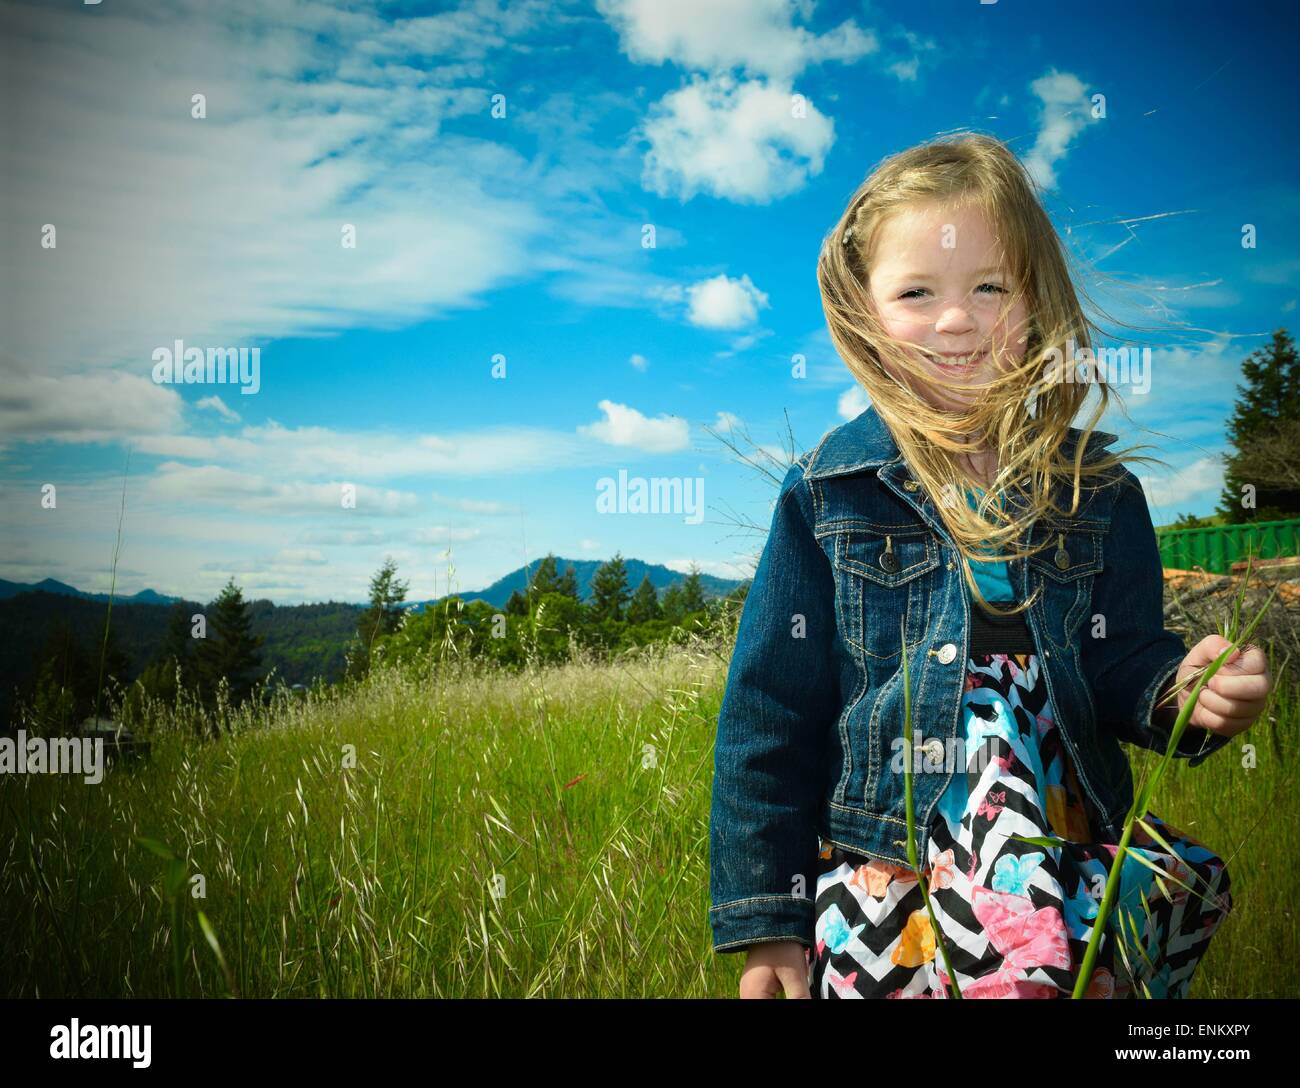 Playing in a field with a  bright blue sky. Stock Photo